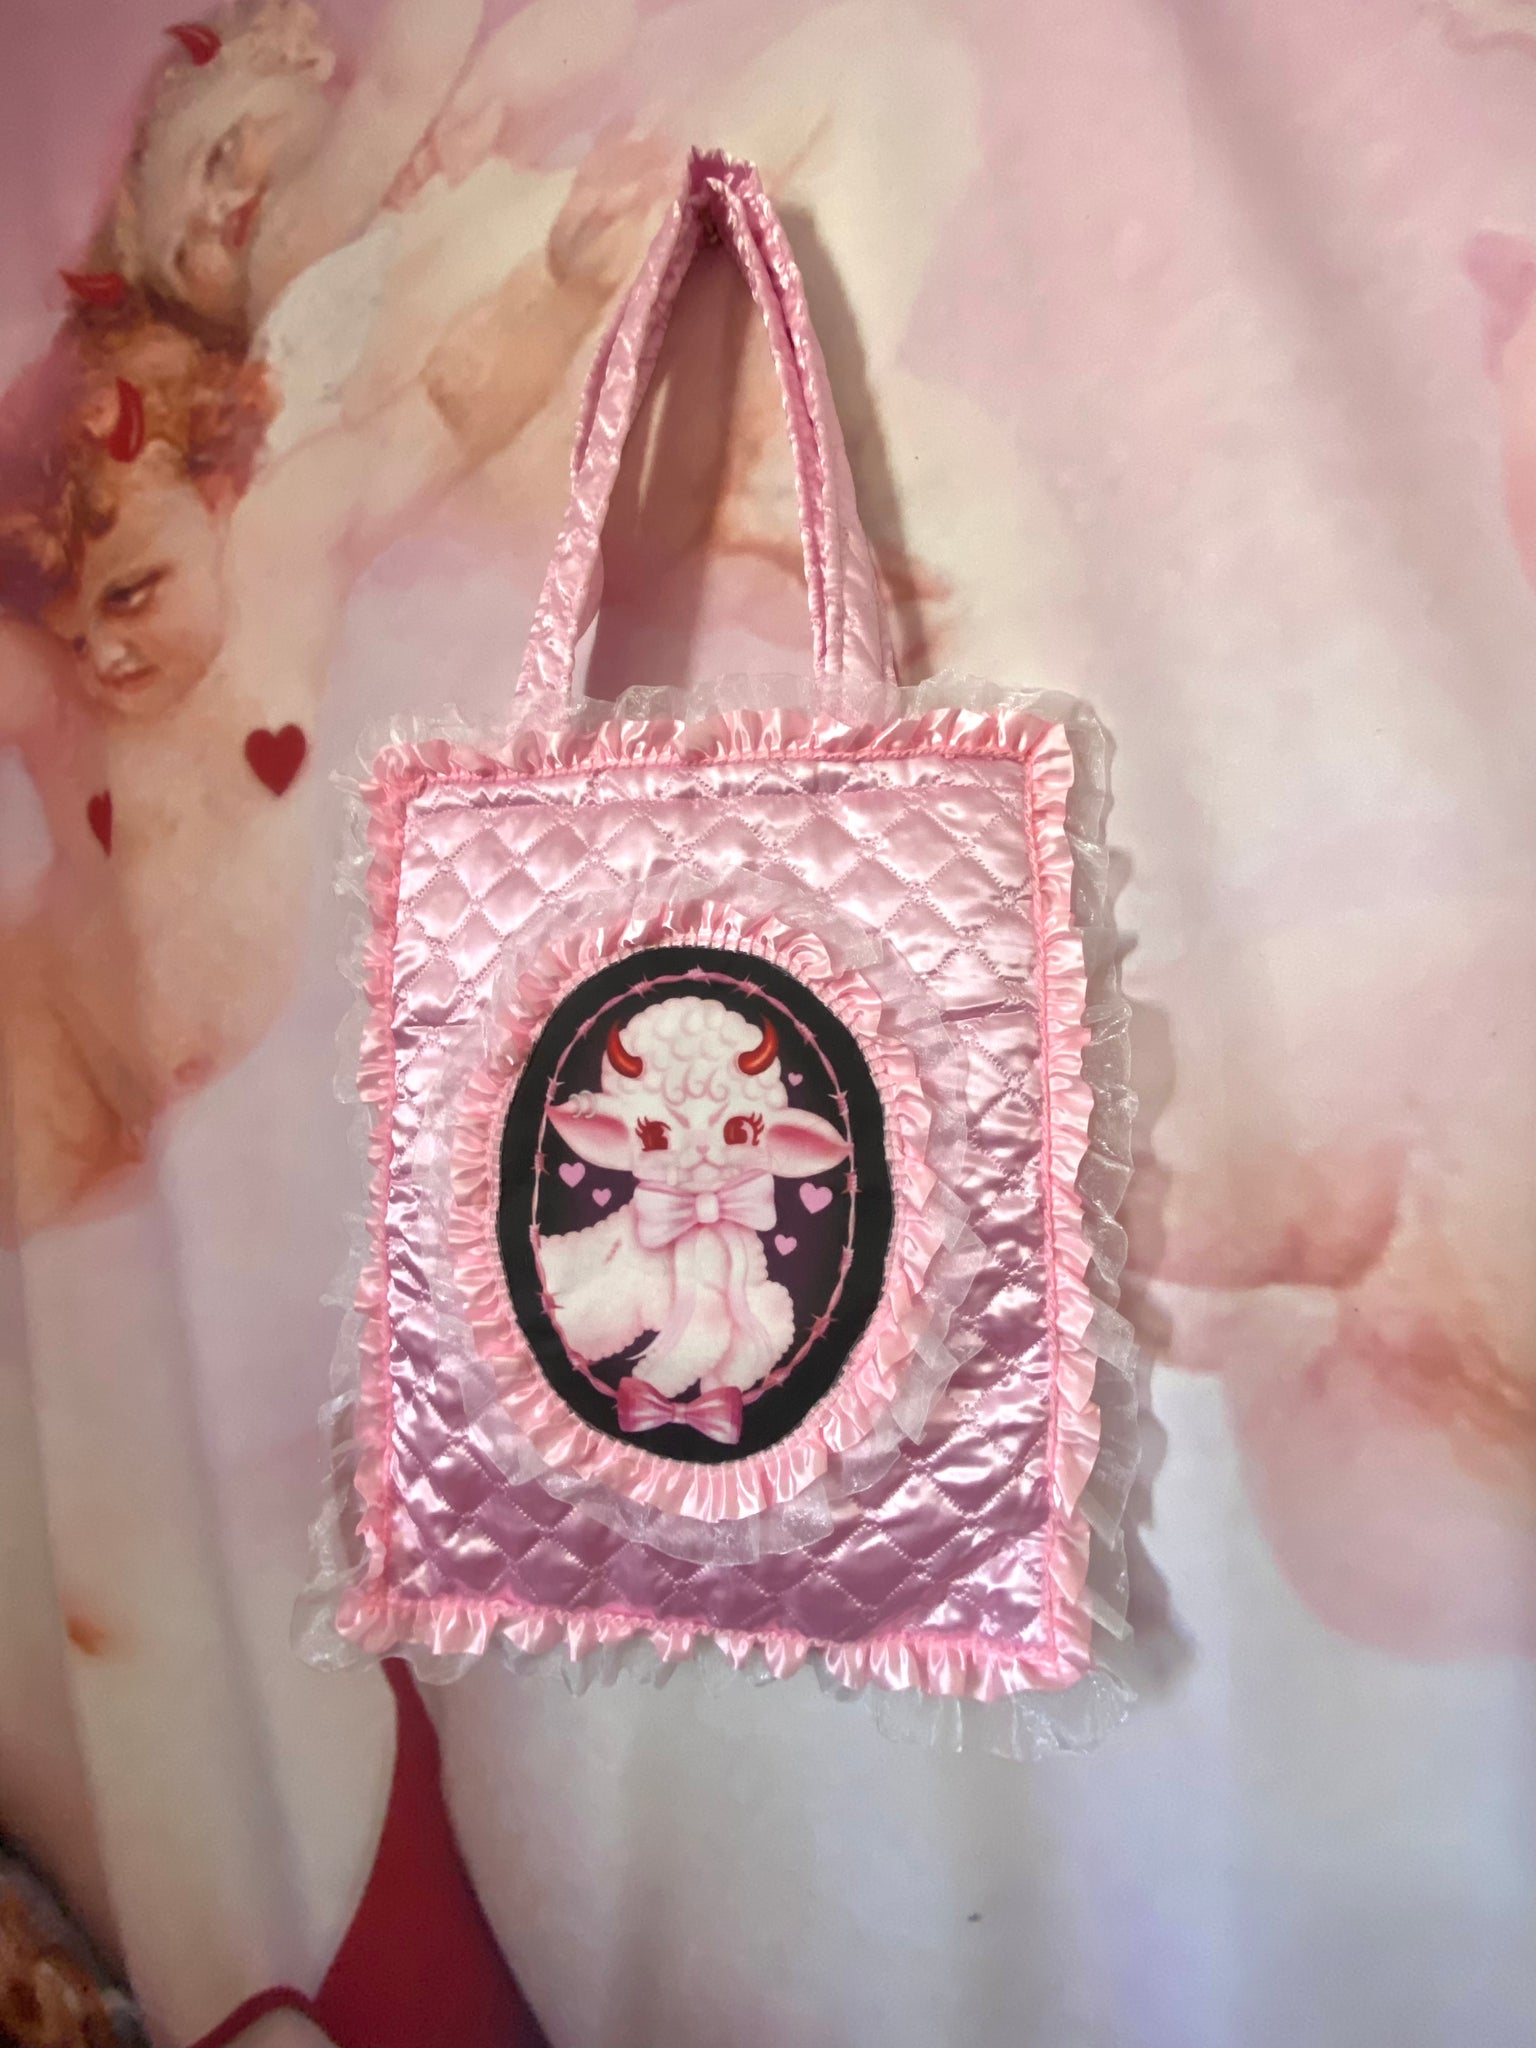 Cute Mini Bow Crossbody Pearl Handbag For Little Girls Perfect For Parties  And Everyday Use From Mschinny888, $21.32 | DHgate.Com